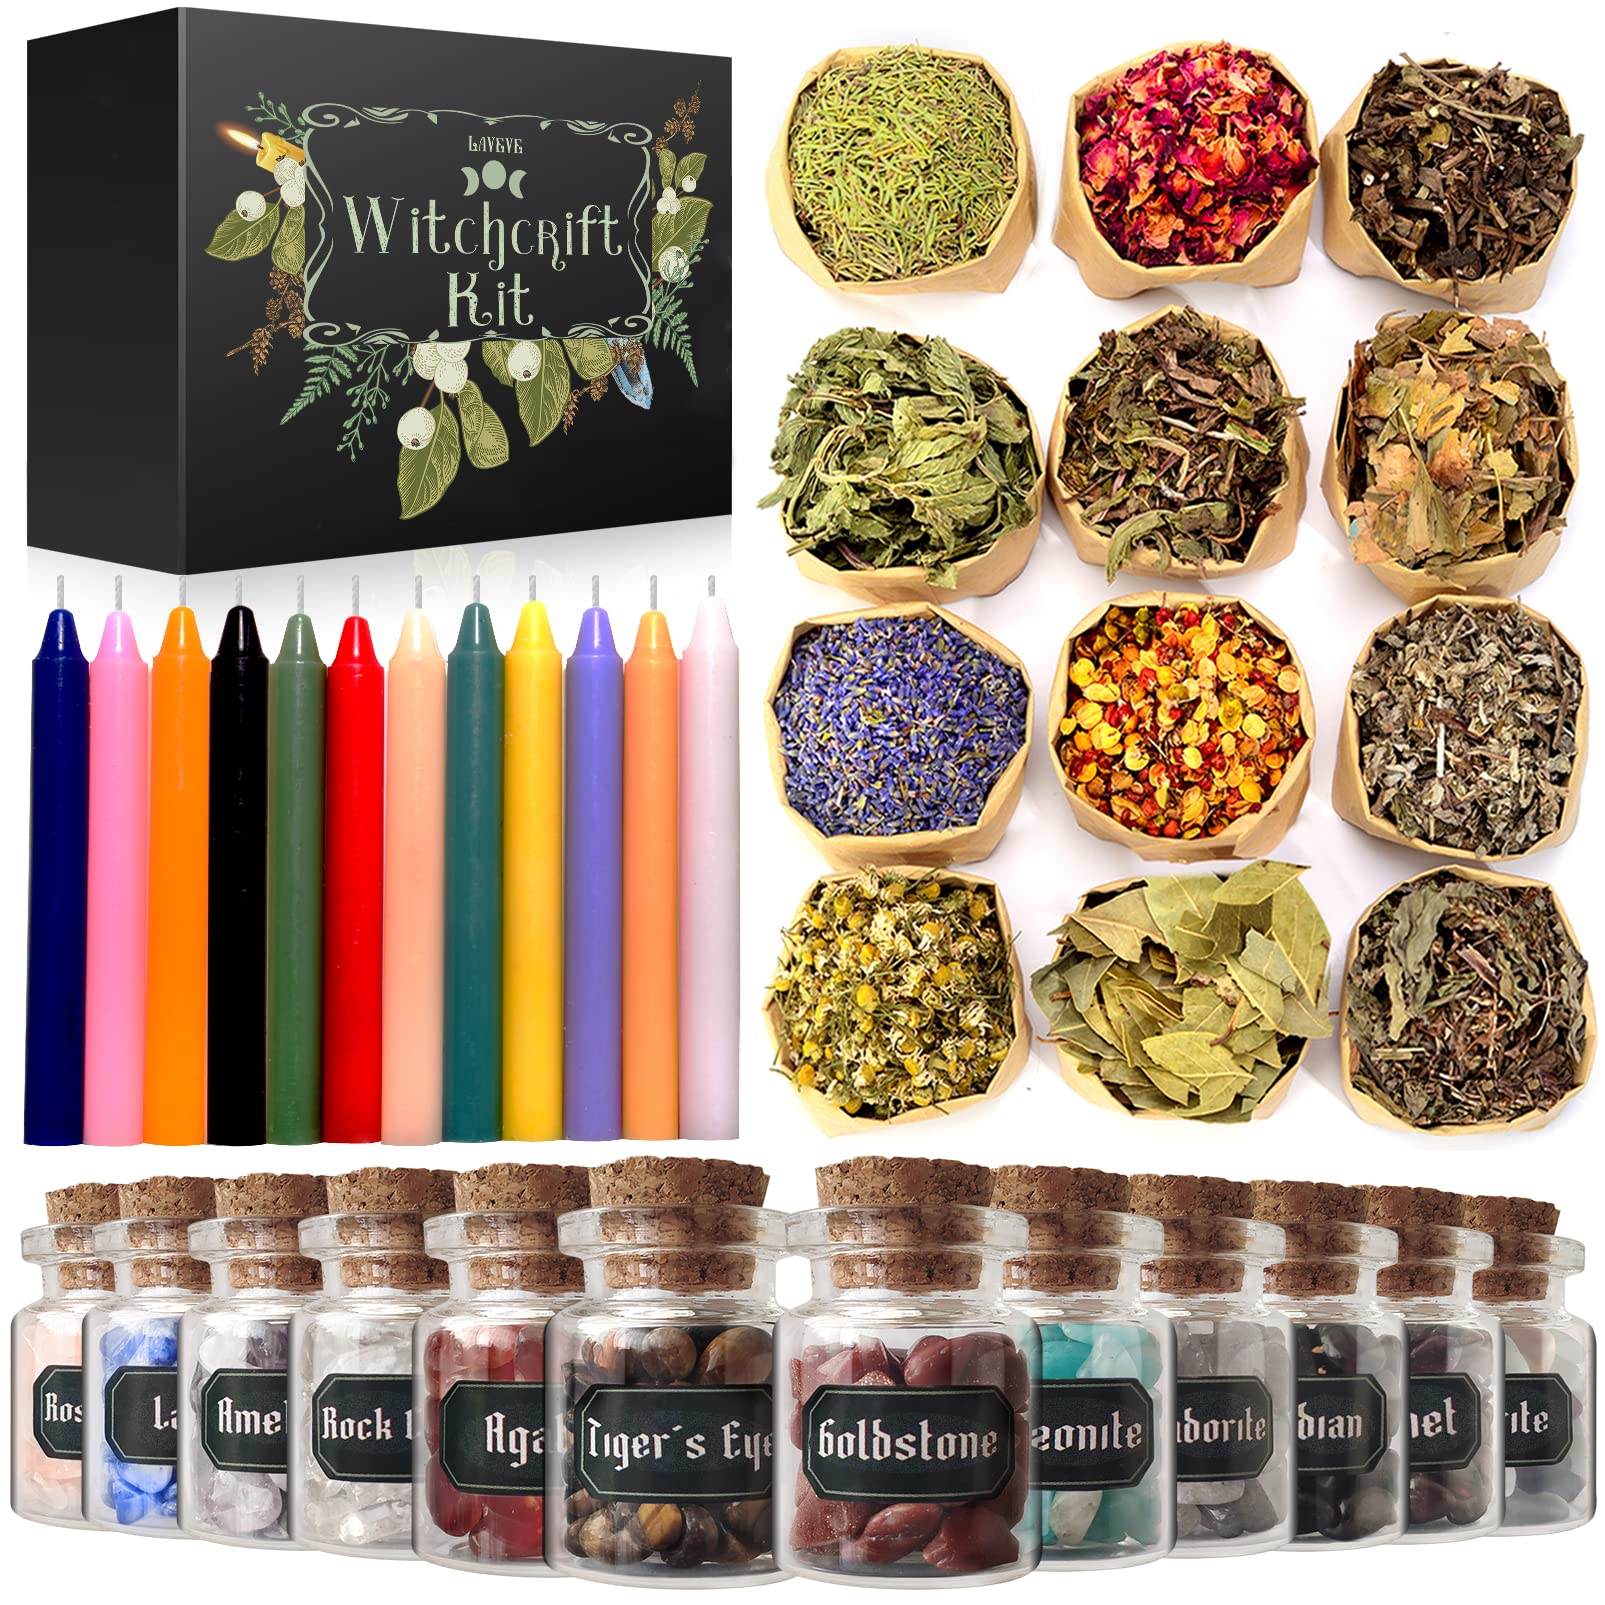 Witchcraft Supplies Kit for Spells, 48 PCS Witch Box Include Dried Herbs,  Crystal Jars, Colored Candles, Parchment. Wiccan Supplies and Tools,  Beginner Witchcraft Kit Witch Stuff for Pagan, Rituals